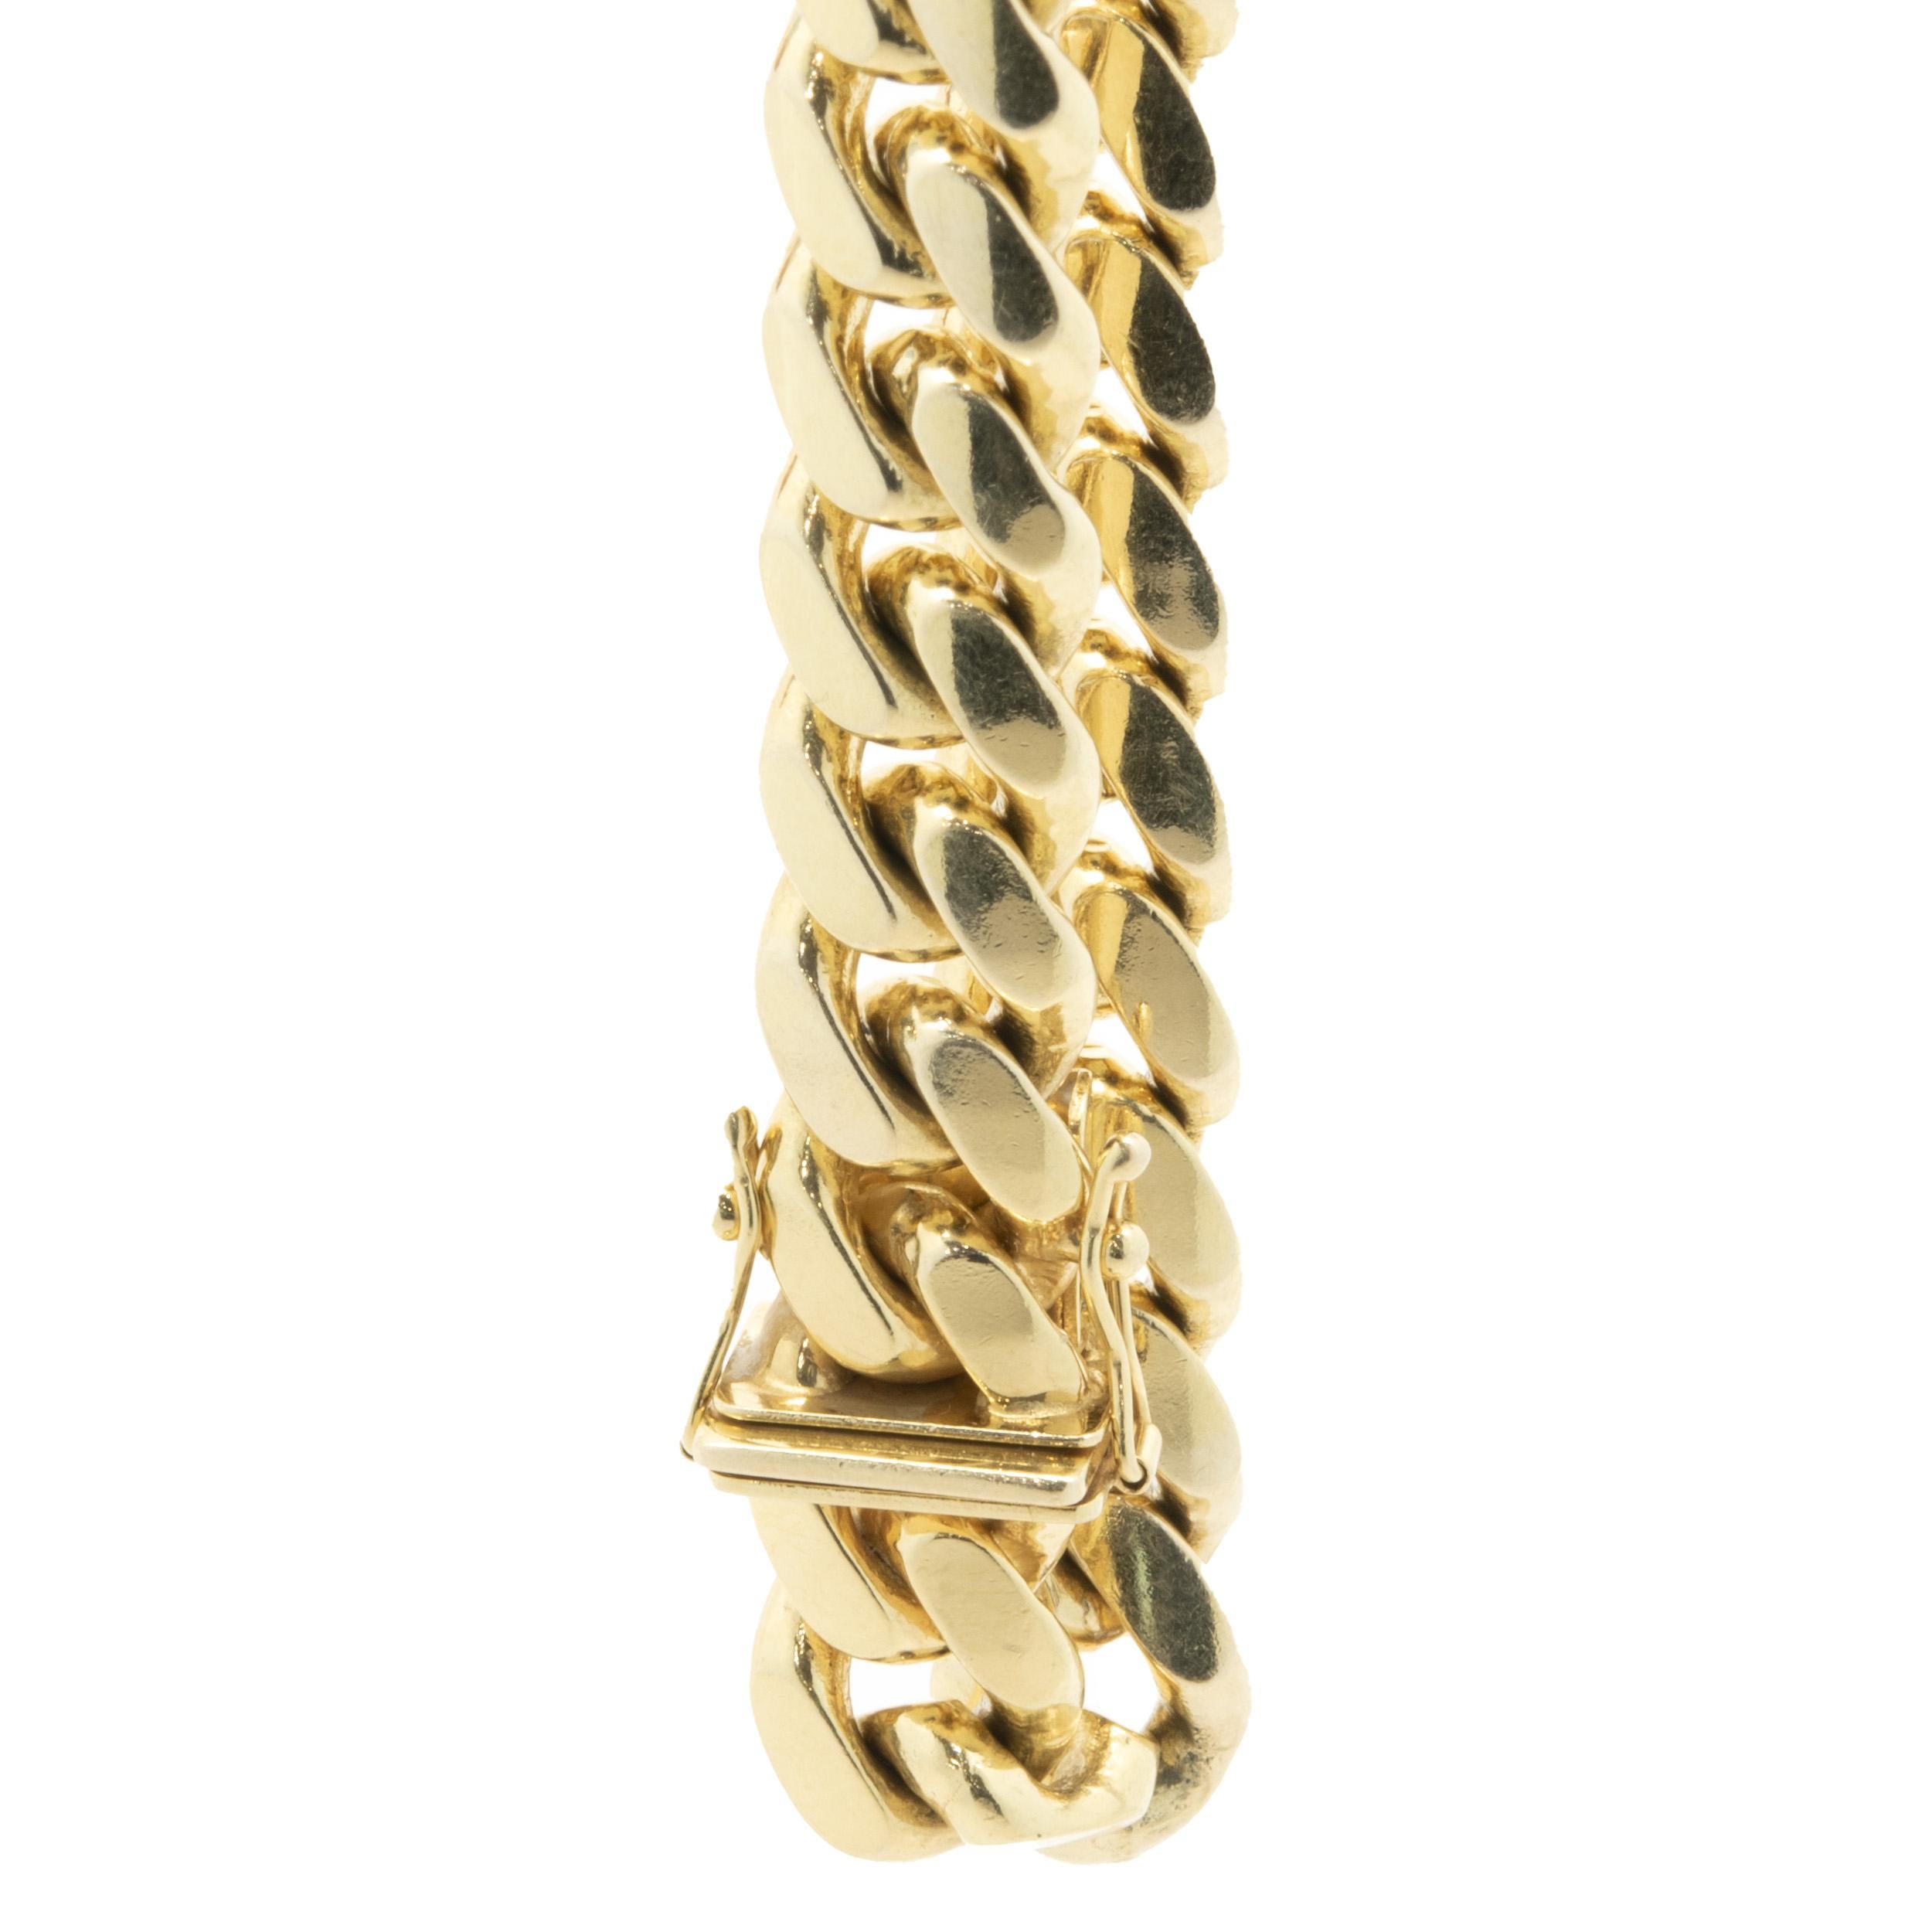 Material: 14K yellow gold
Dimensions: bracelet will fit up to an 7.5-inch wrist
Weight: 69.34 grams